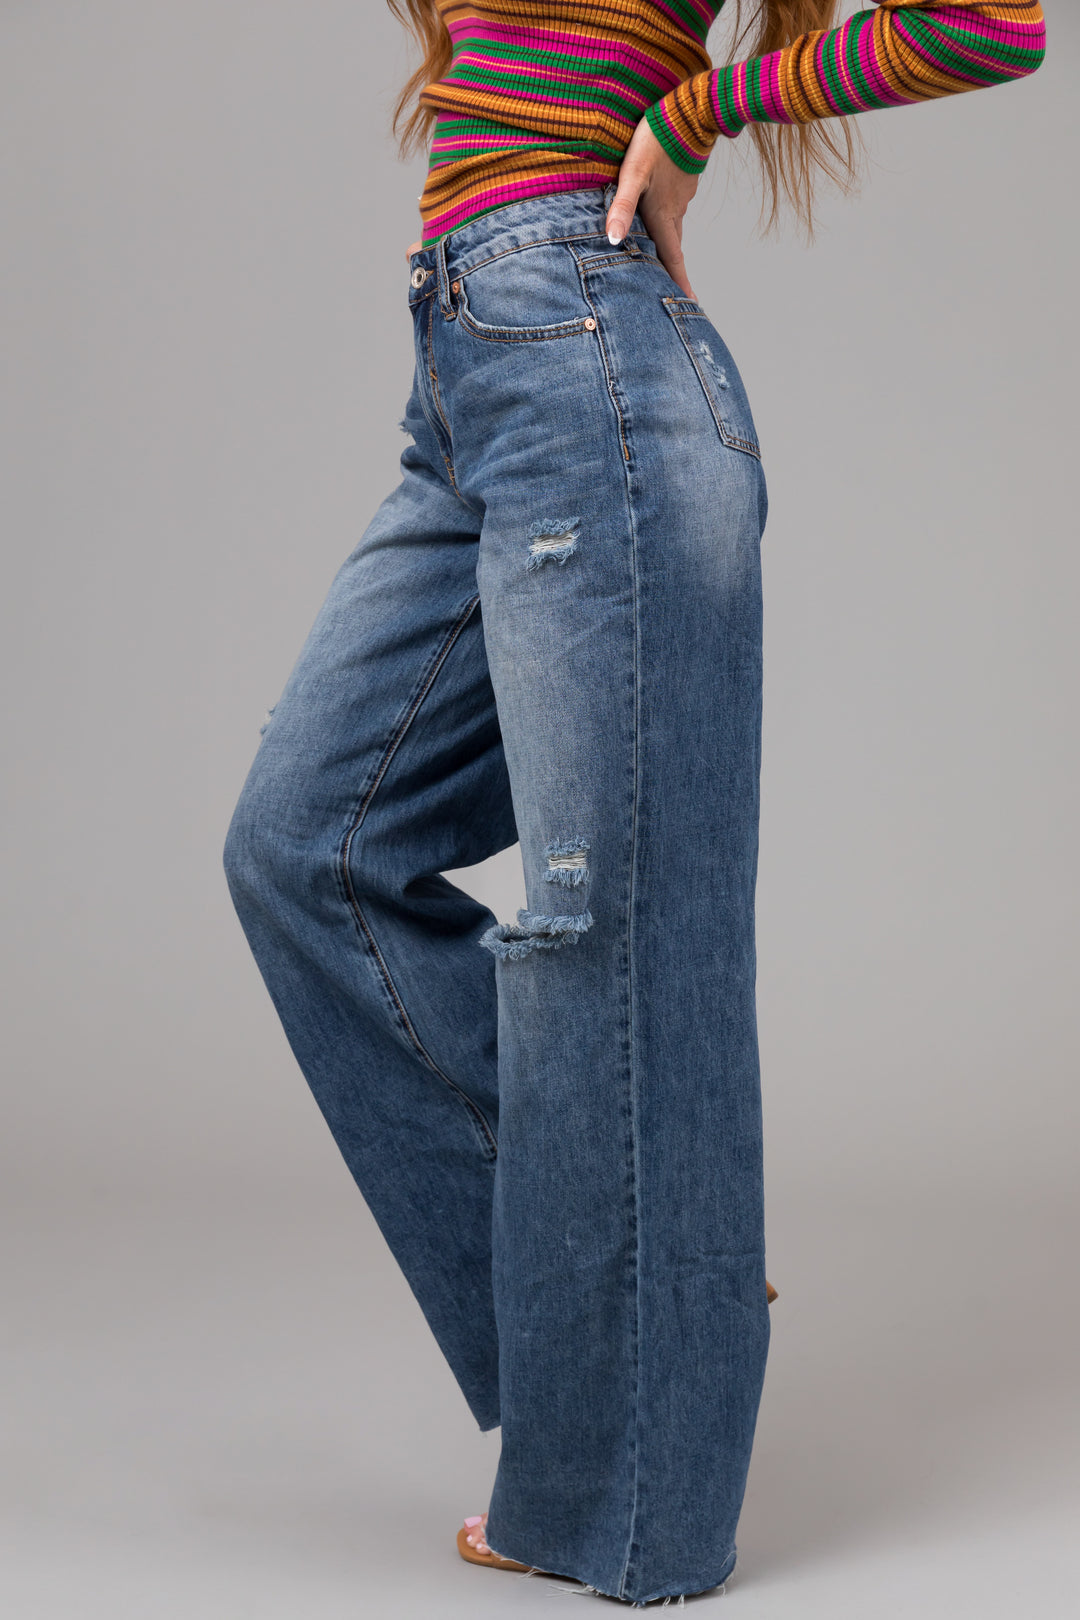 Special A Medium Wash Wide Leg Distressed Knee Dad Jeans & Lime Lush